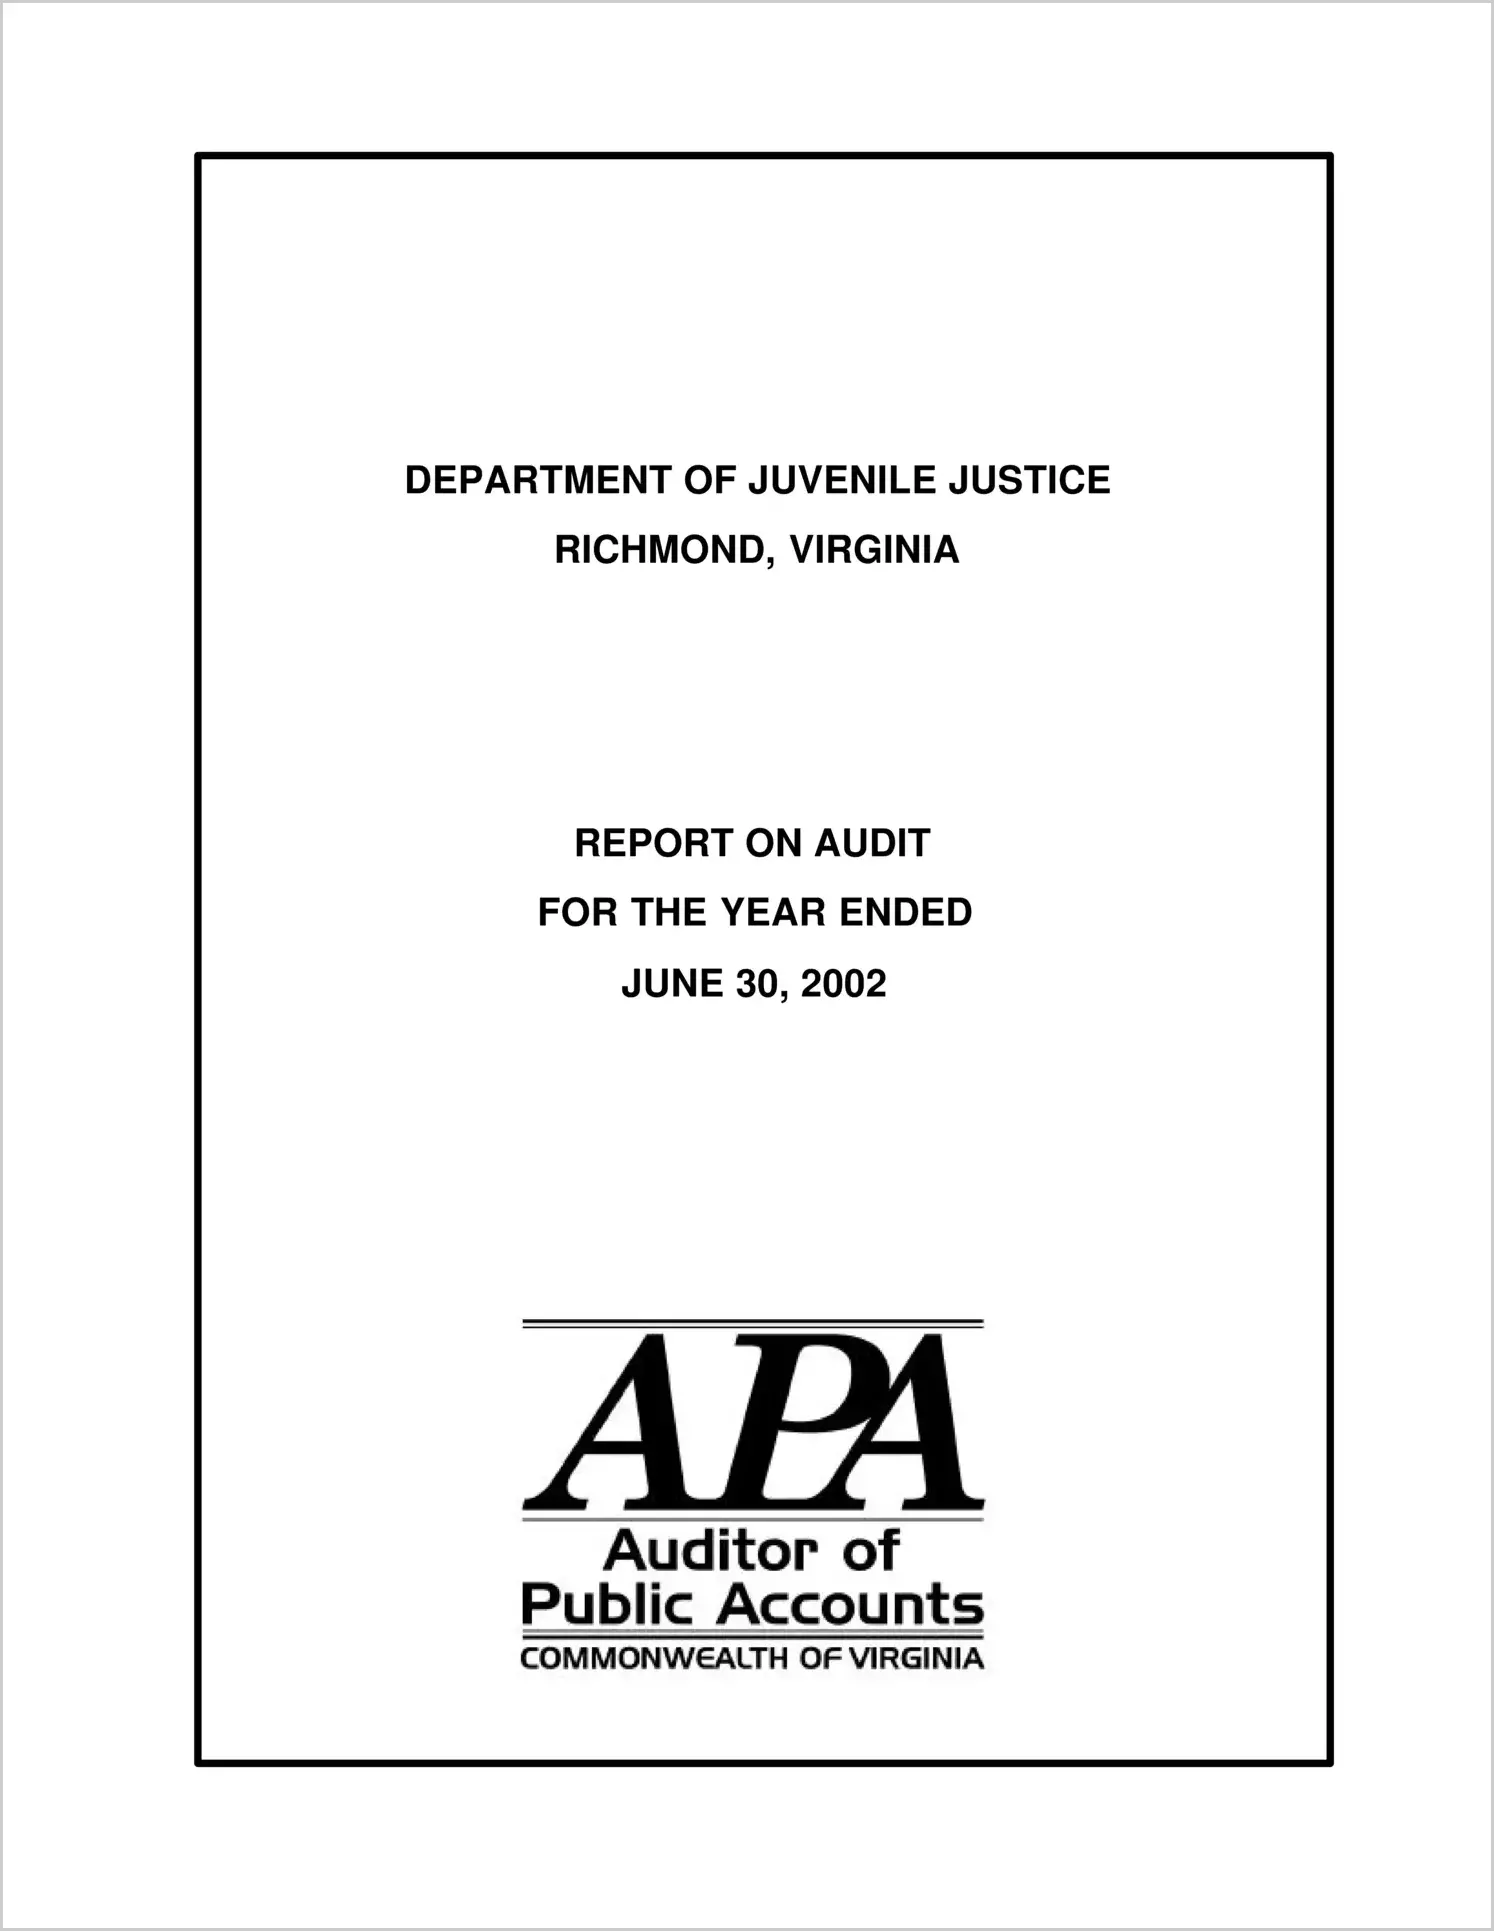 Department of Juvenile Justice for the year ended June 30, 2002